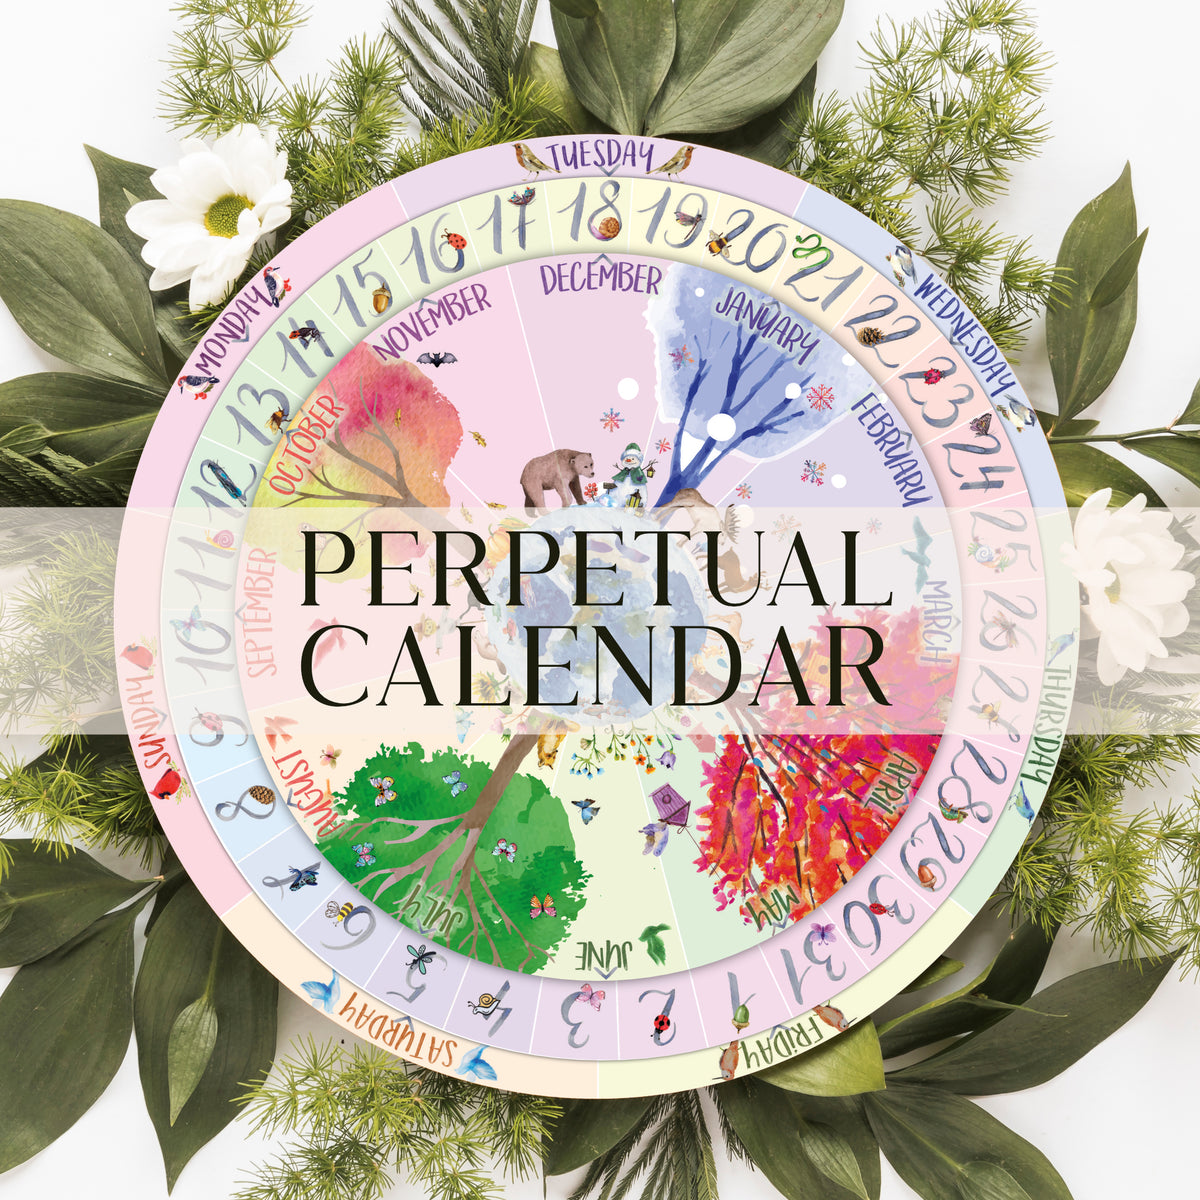 Make Your Own Perpetual Calendar with this Beautiful Printable